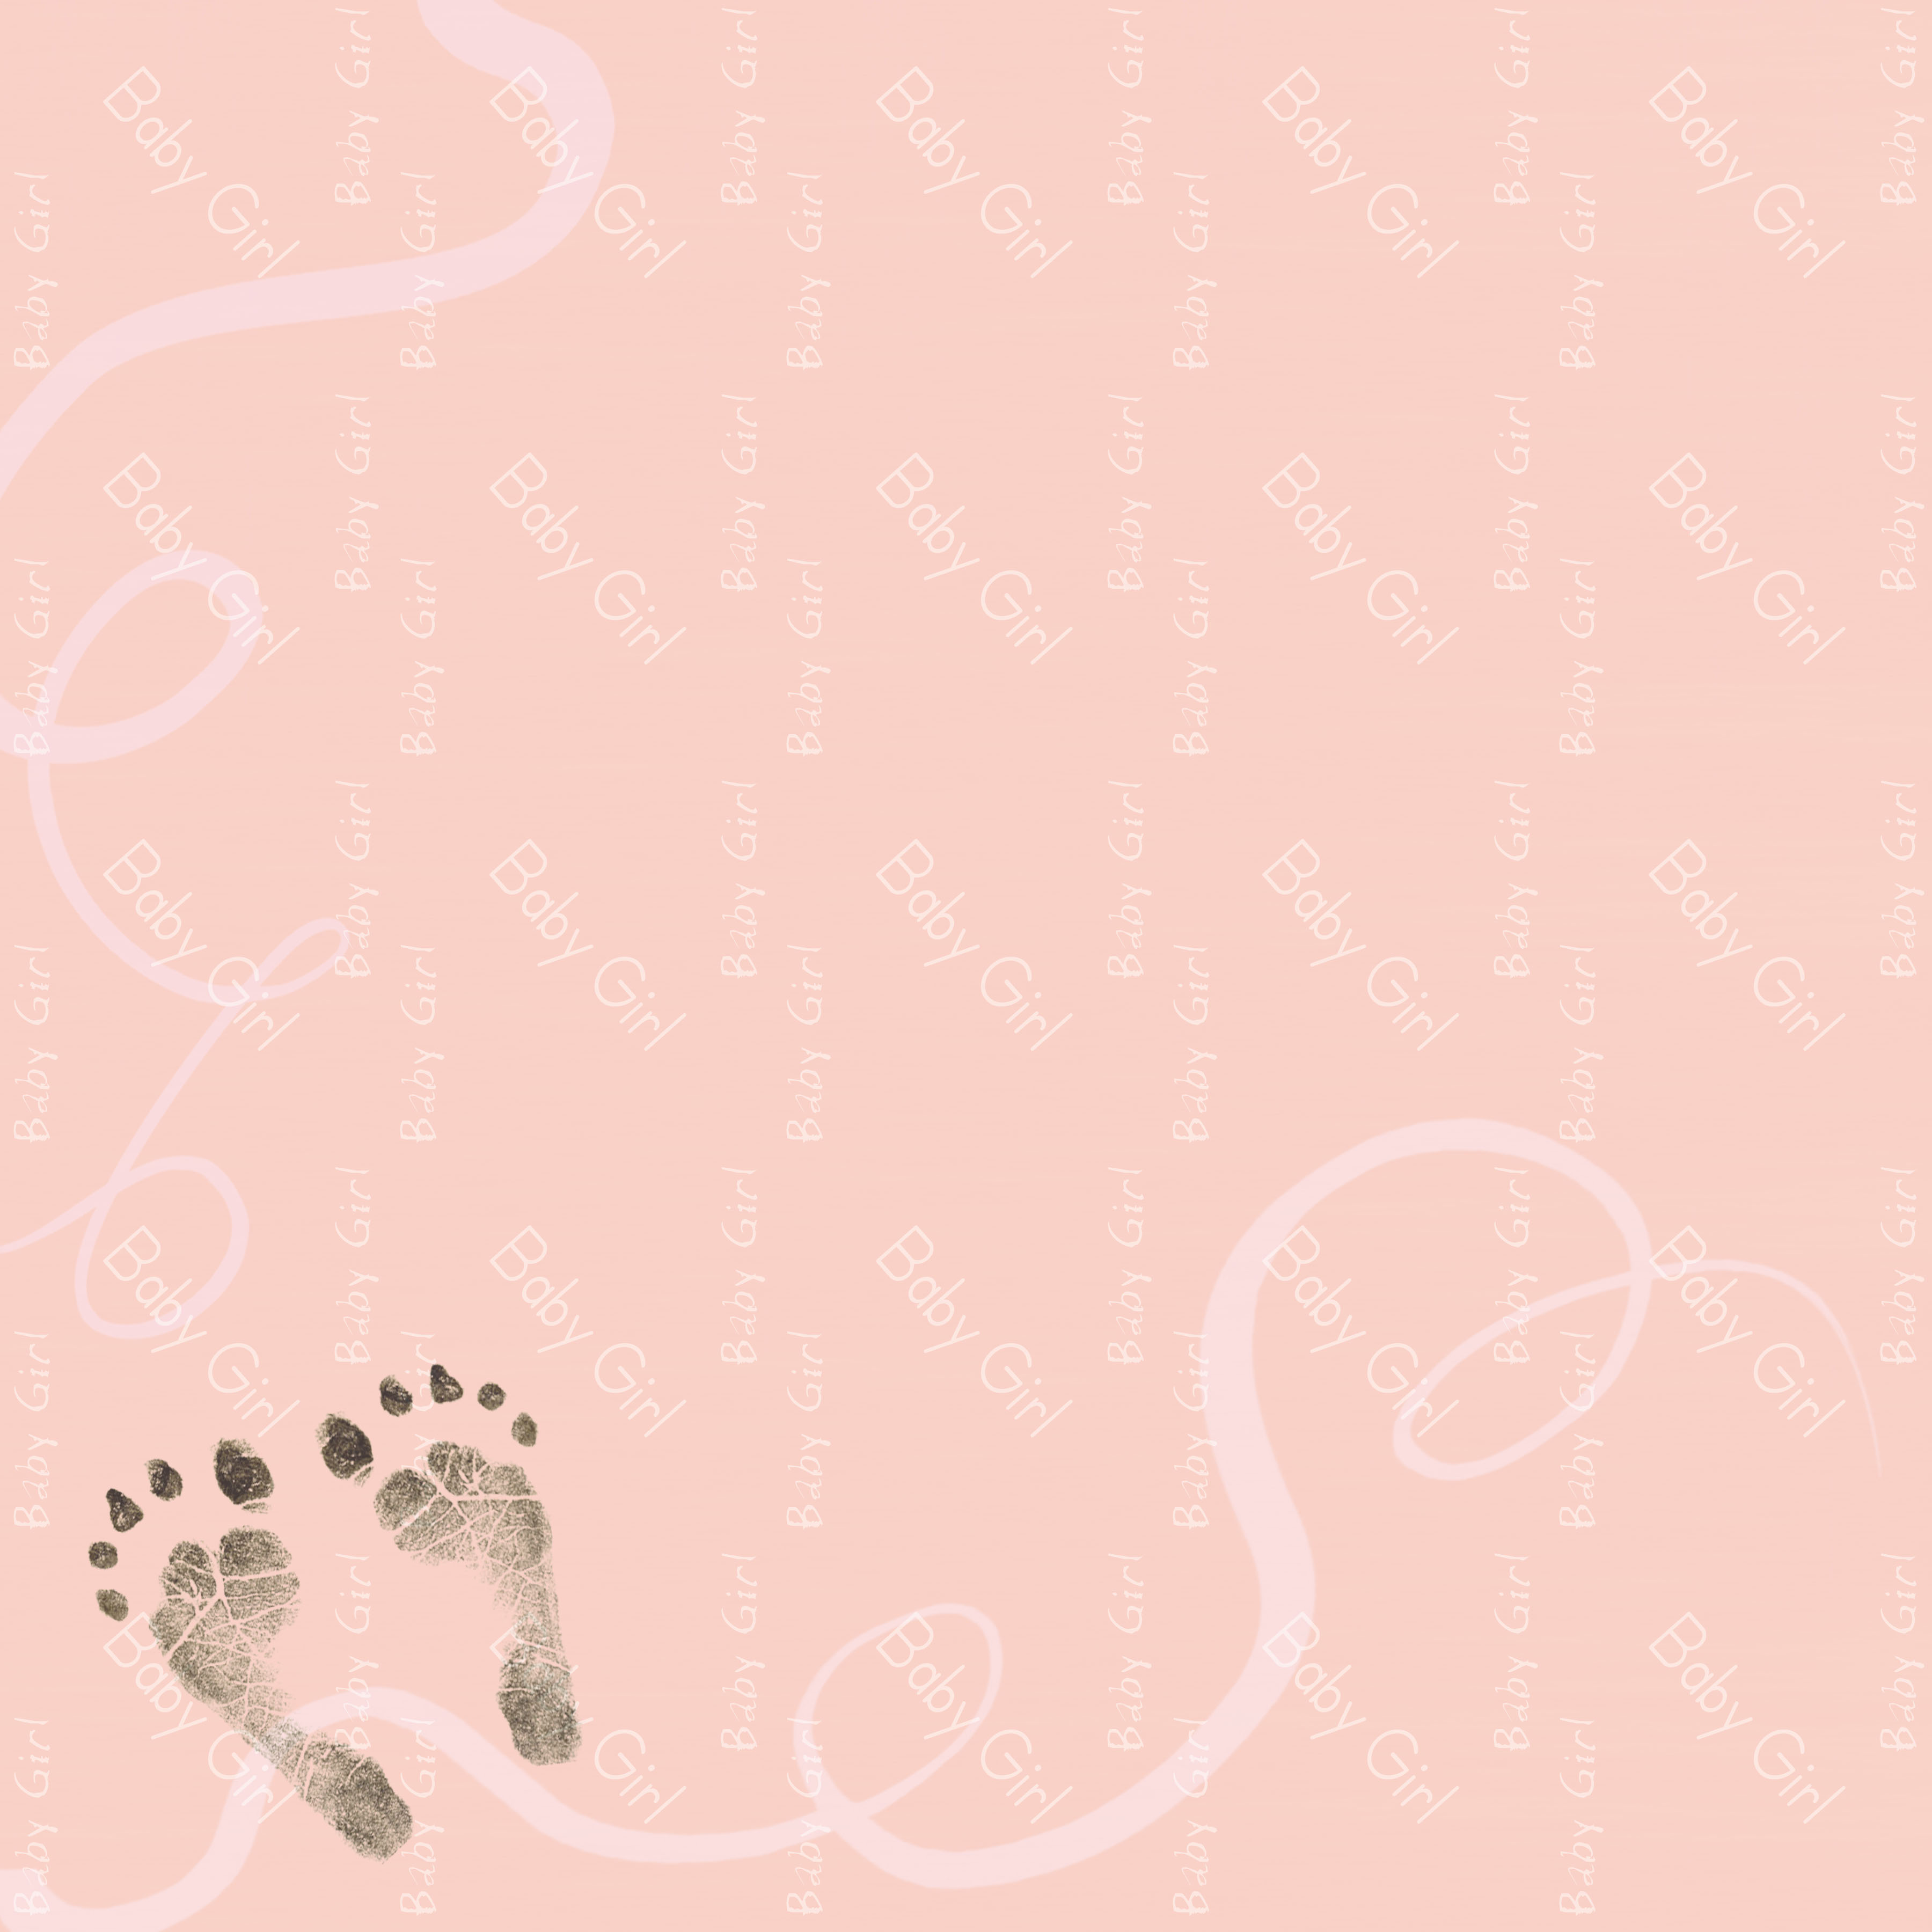 Background For Baby Pictures